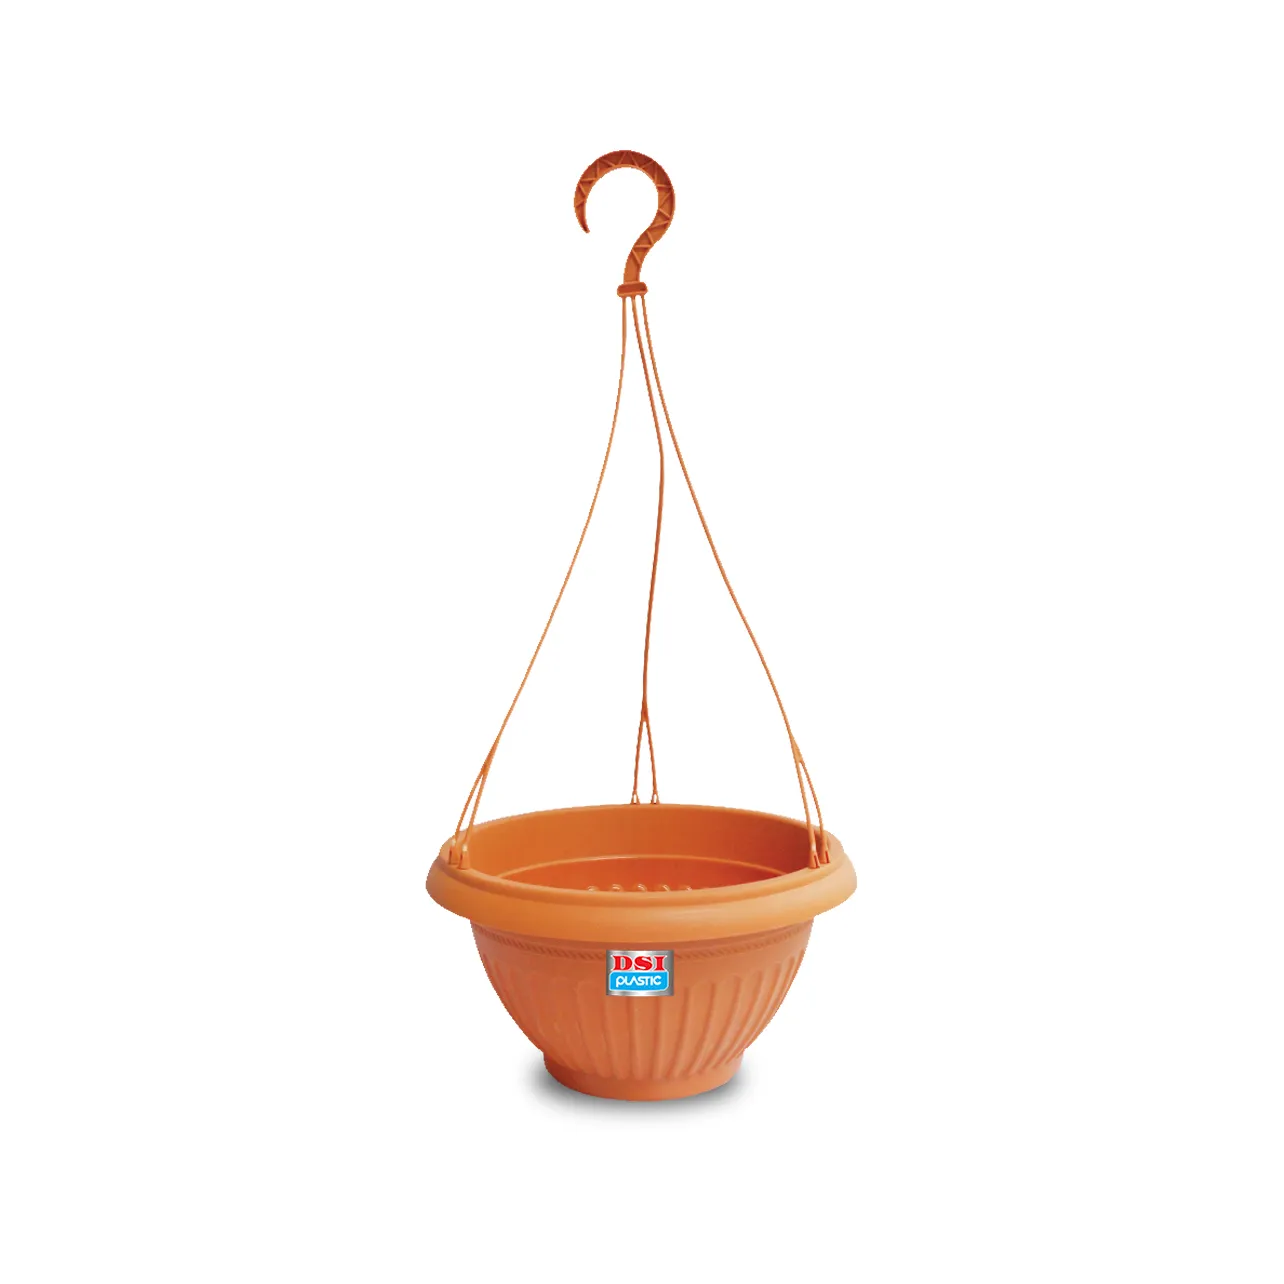 LILAC POT WITH HANGER(BROWN) - Pots & Planters - in Sri Lanka